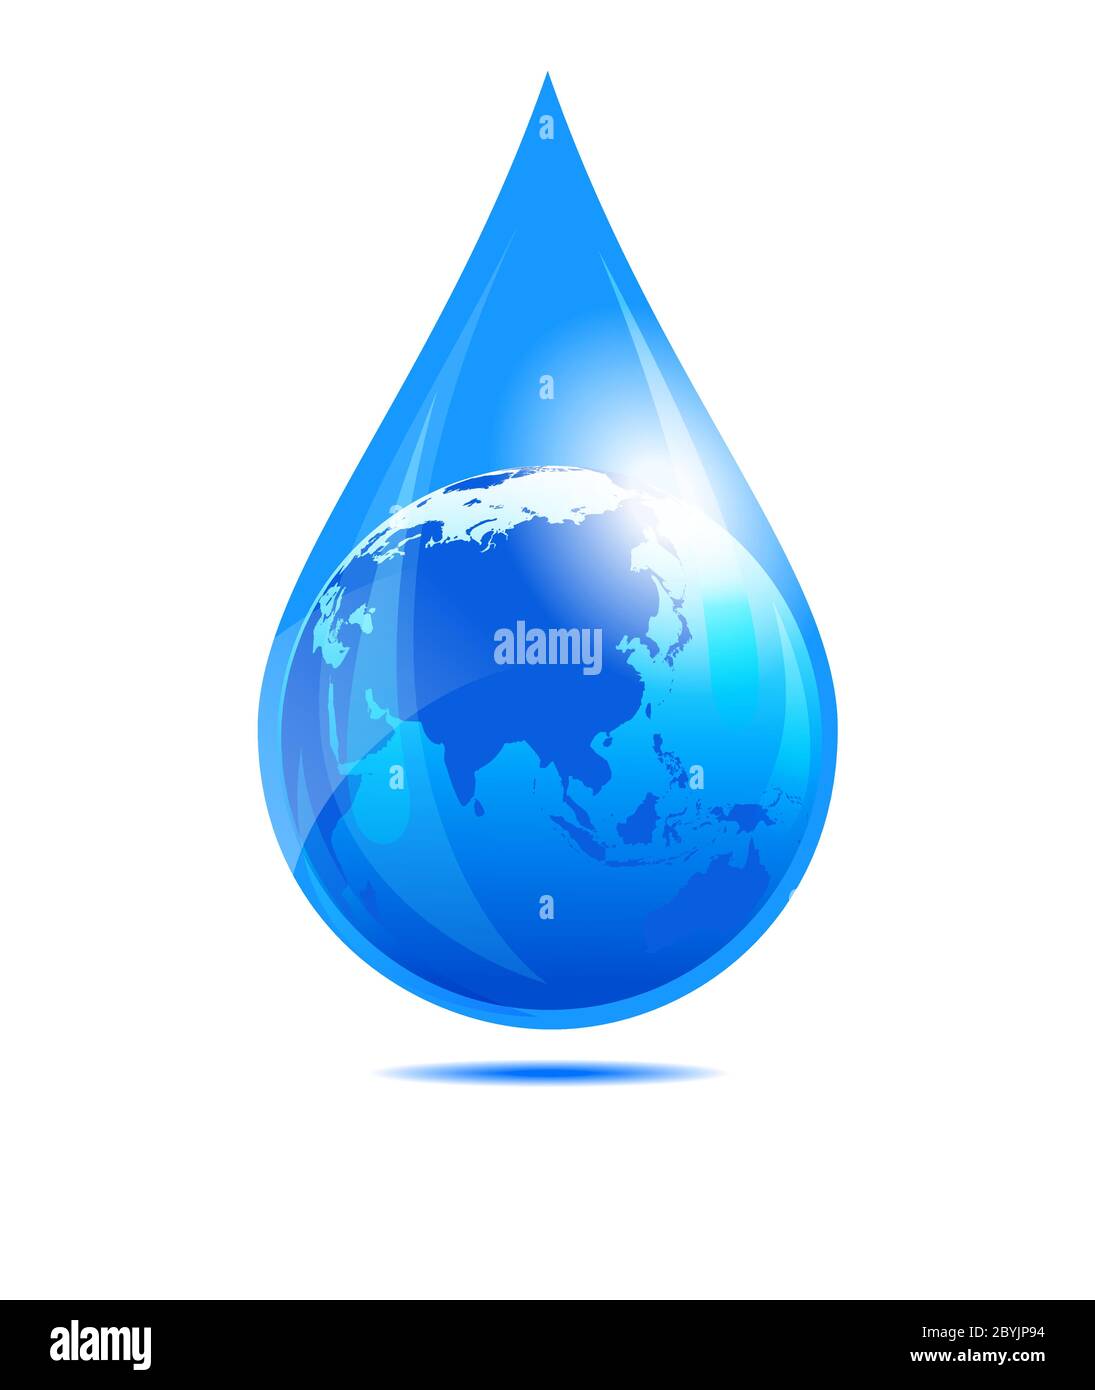 Water Drop World, China, Indien, Fernost, Philippinen, Malaysia, Globe in a Water Droplet Concept. Stock Vektor